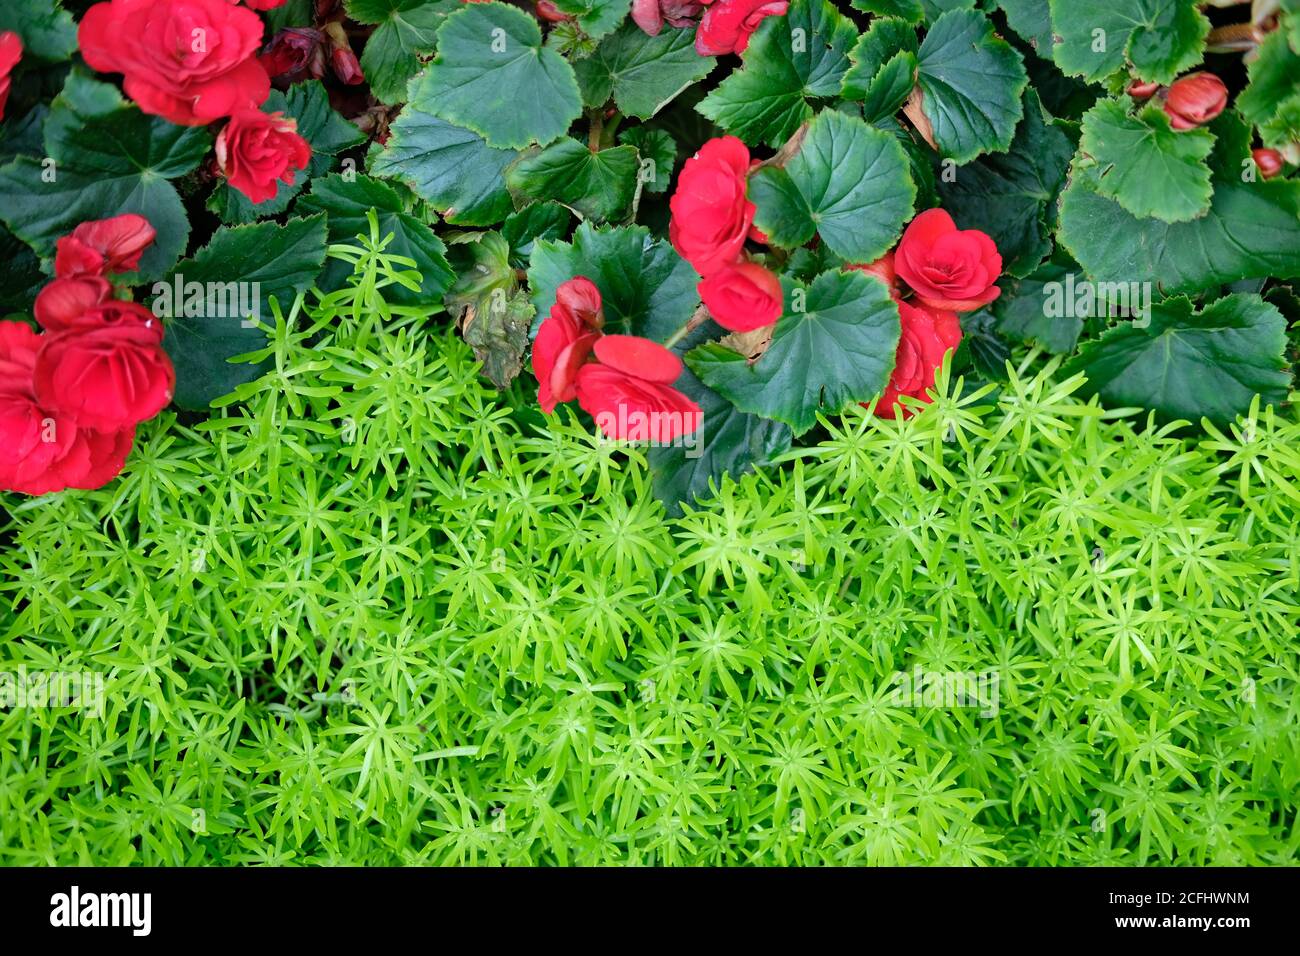 green natural leaves plant & red begonia flower. nature texture background abstract Stock Photo